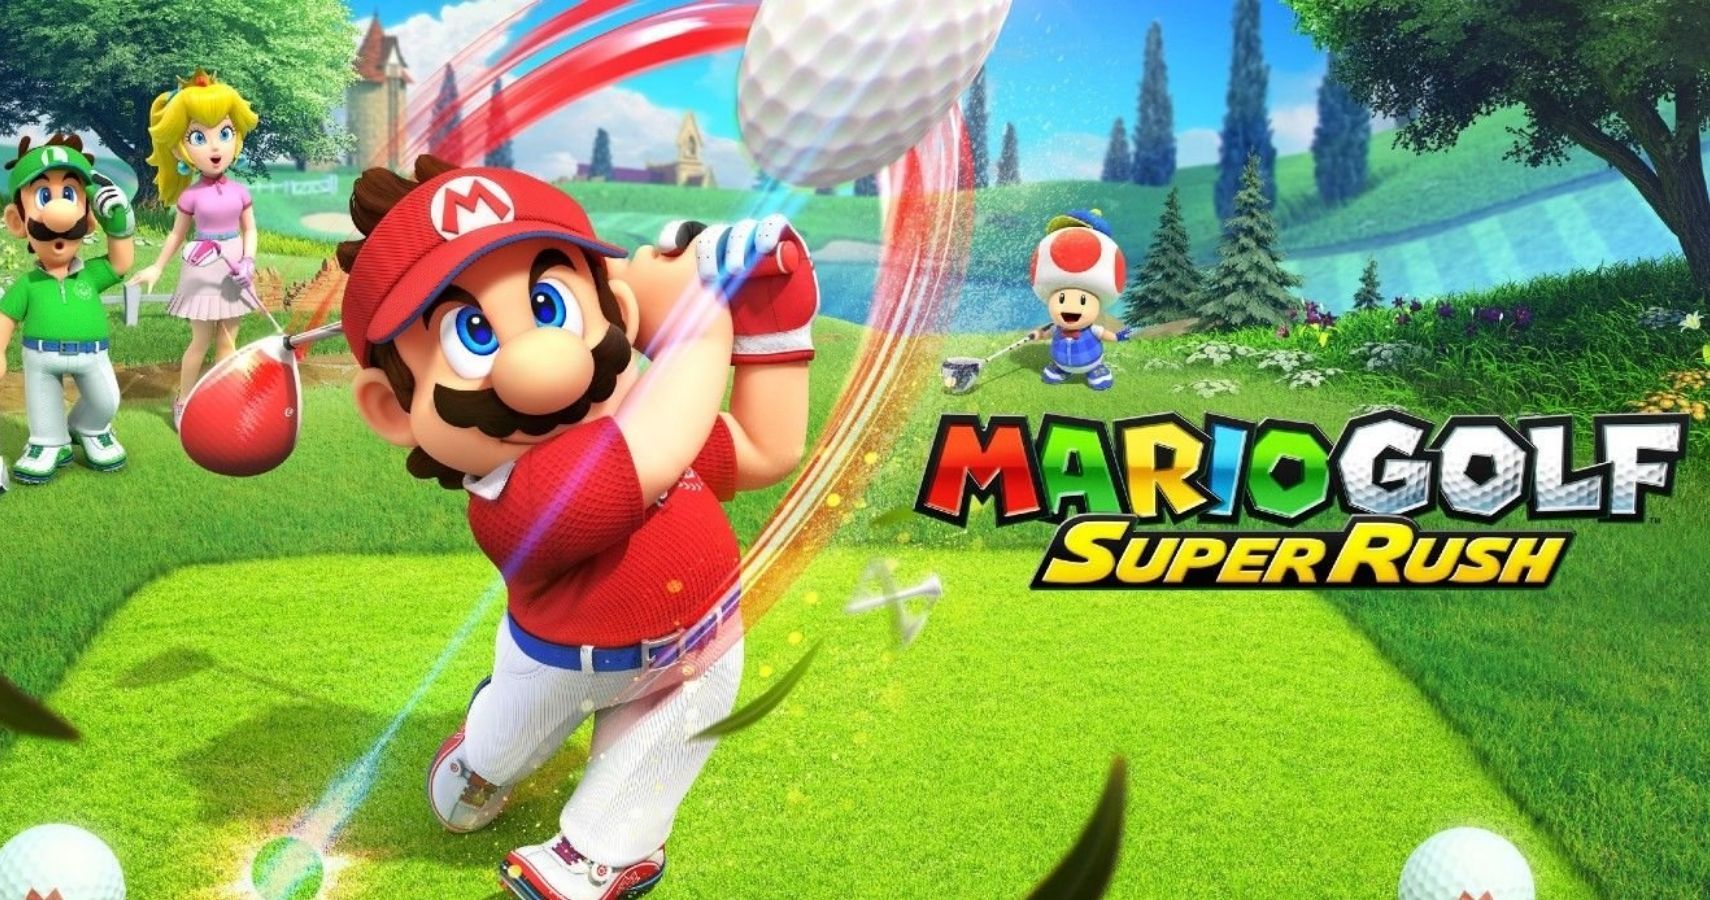 Mario is playing golf. He has just made a shot, while Luigi and Peach watch in the background.